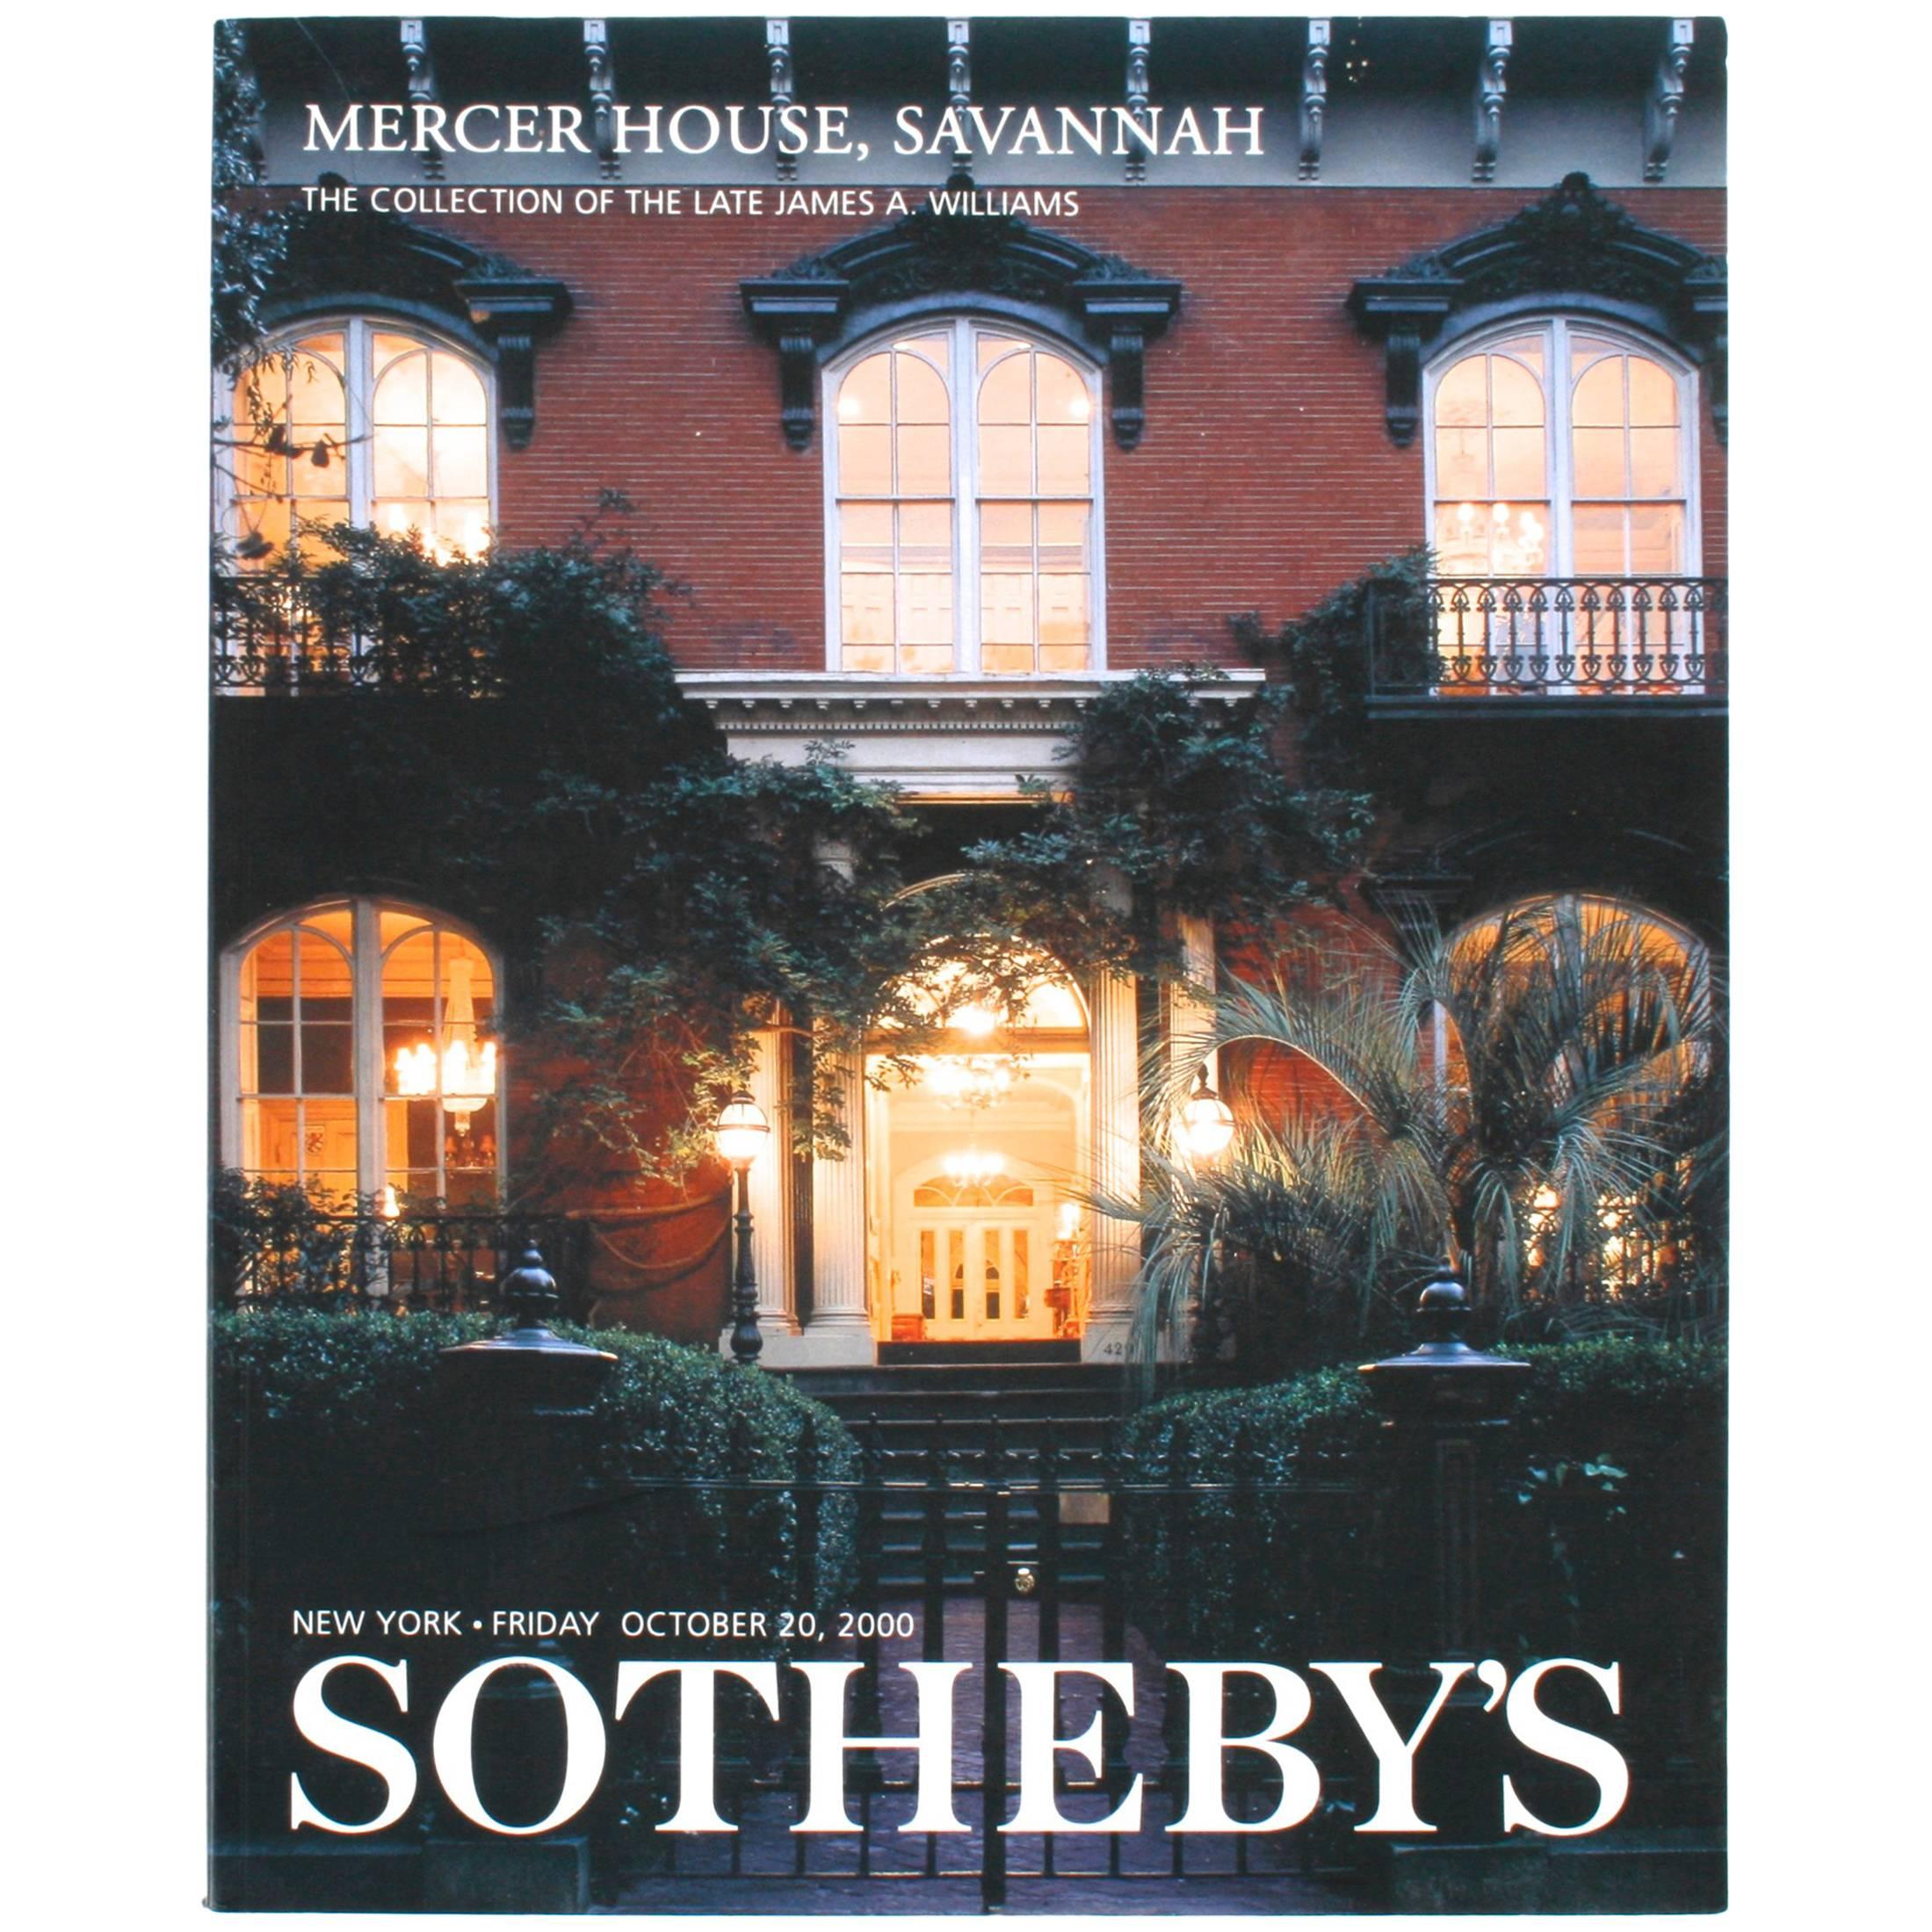 Sotheby's Mercer House, the Collection of the Late James A. Williams, 2000